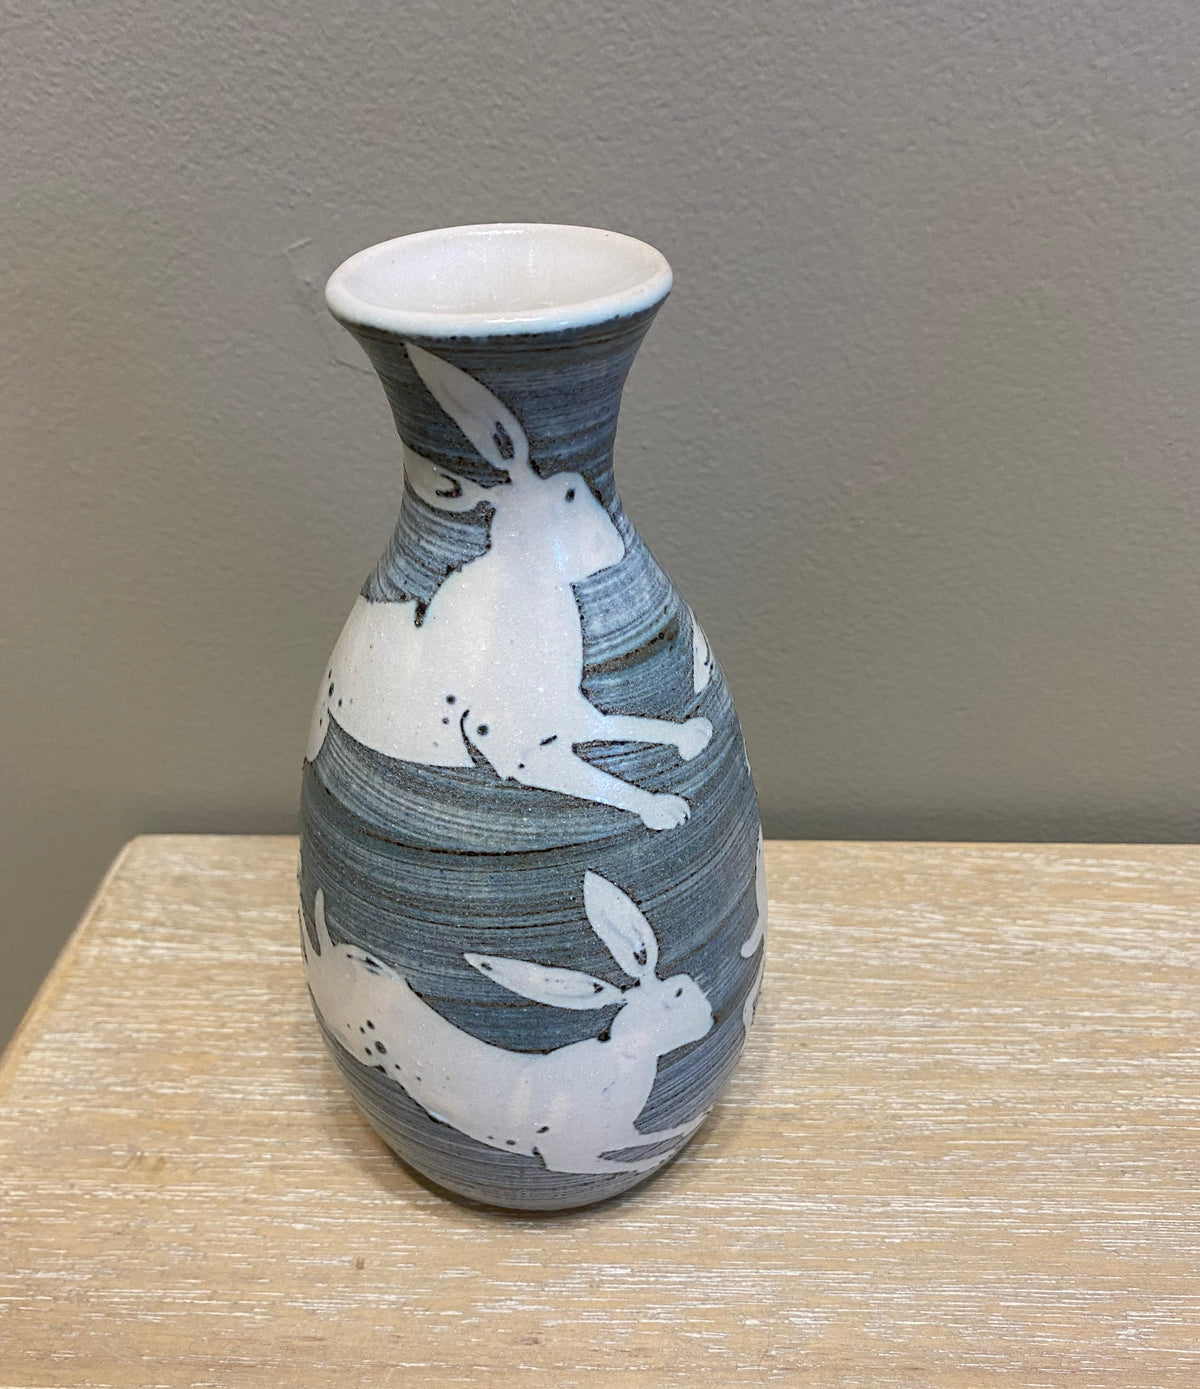 Small Bud Vase by Neil Tregear with Leaping Hare Design